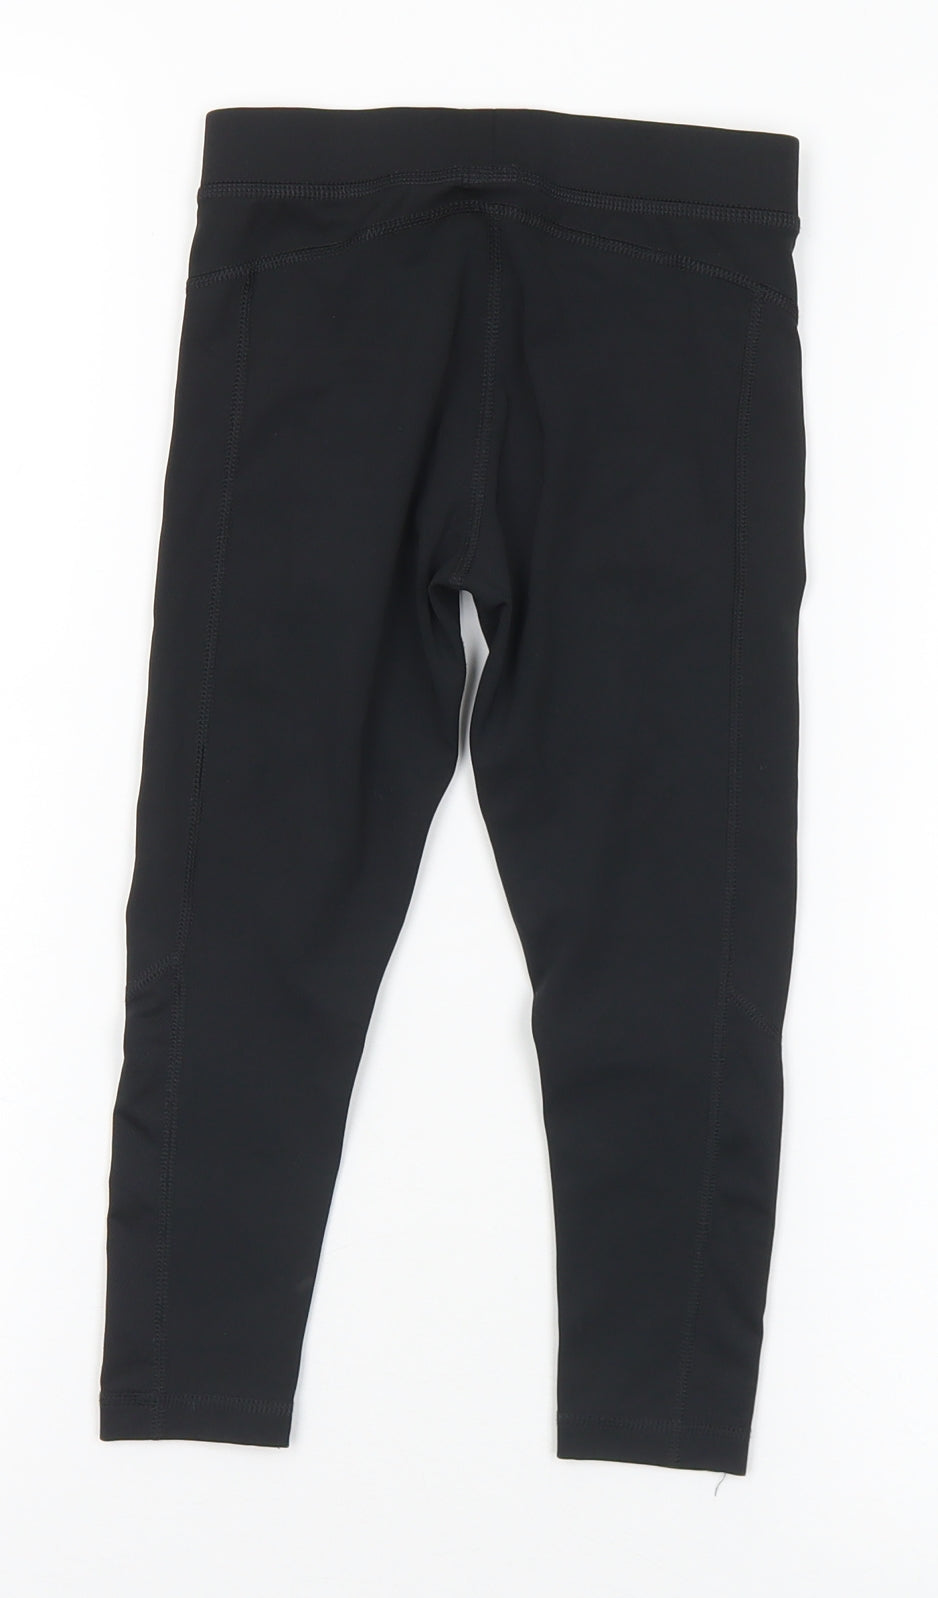 George Girls Black  Polyester Pedal Pusher Trousers Size 5-6 Years  Regular